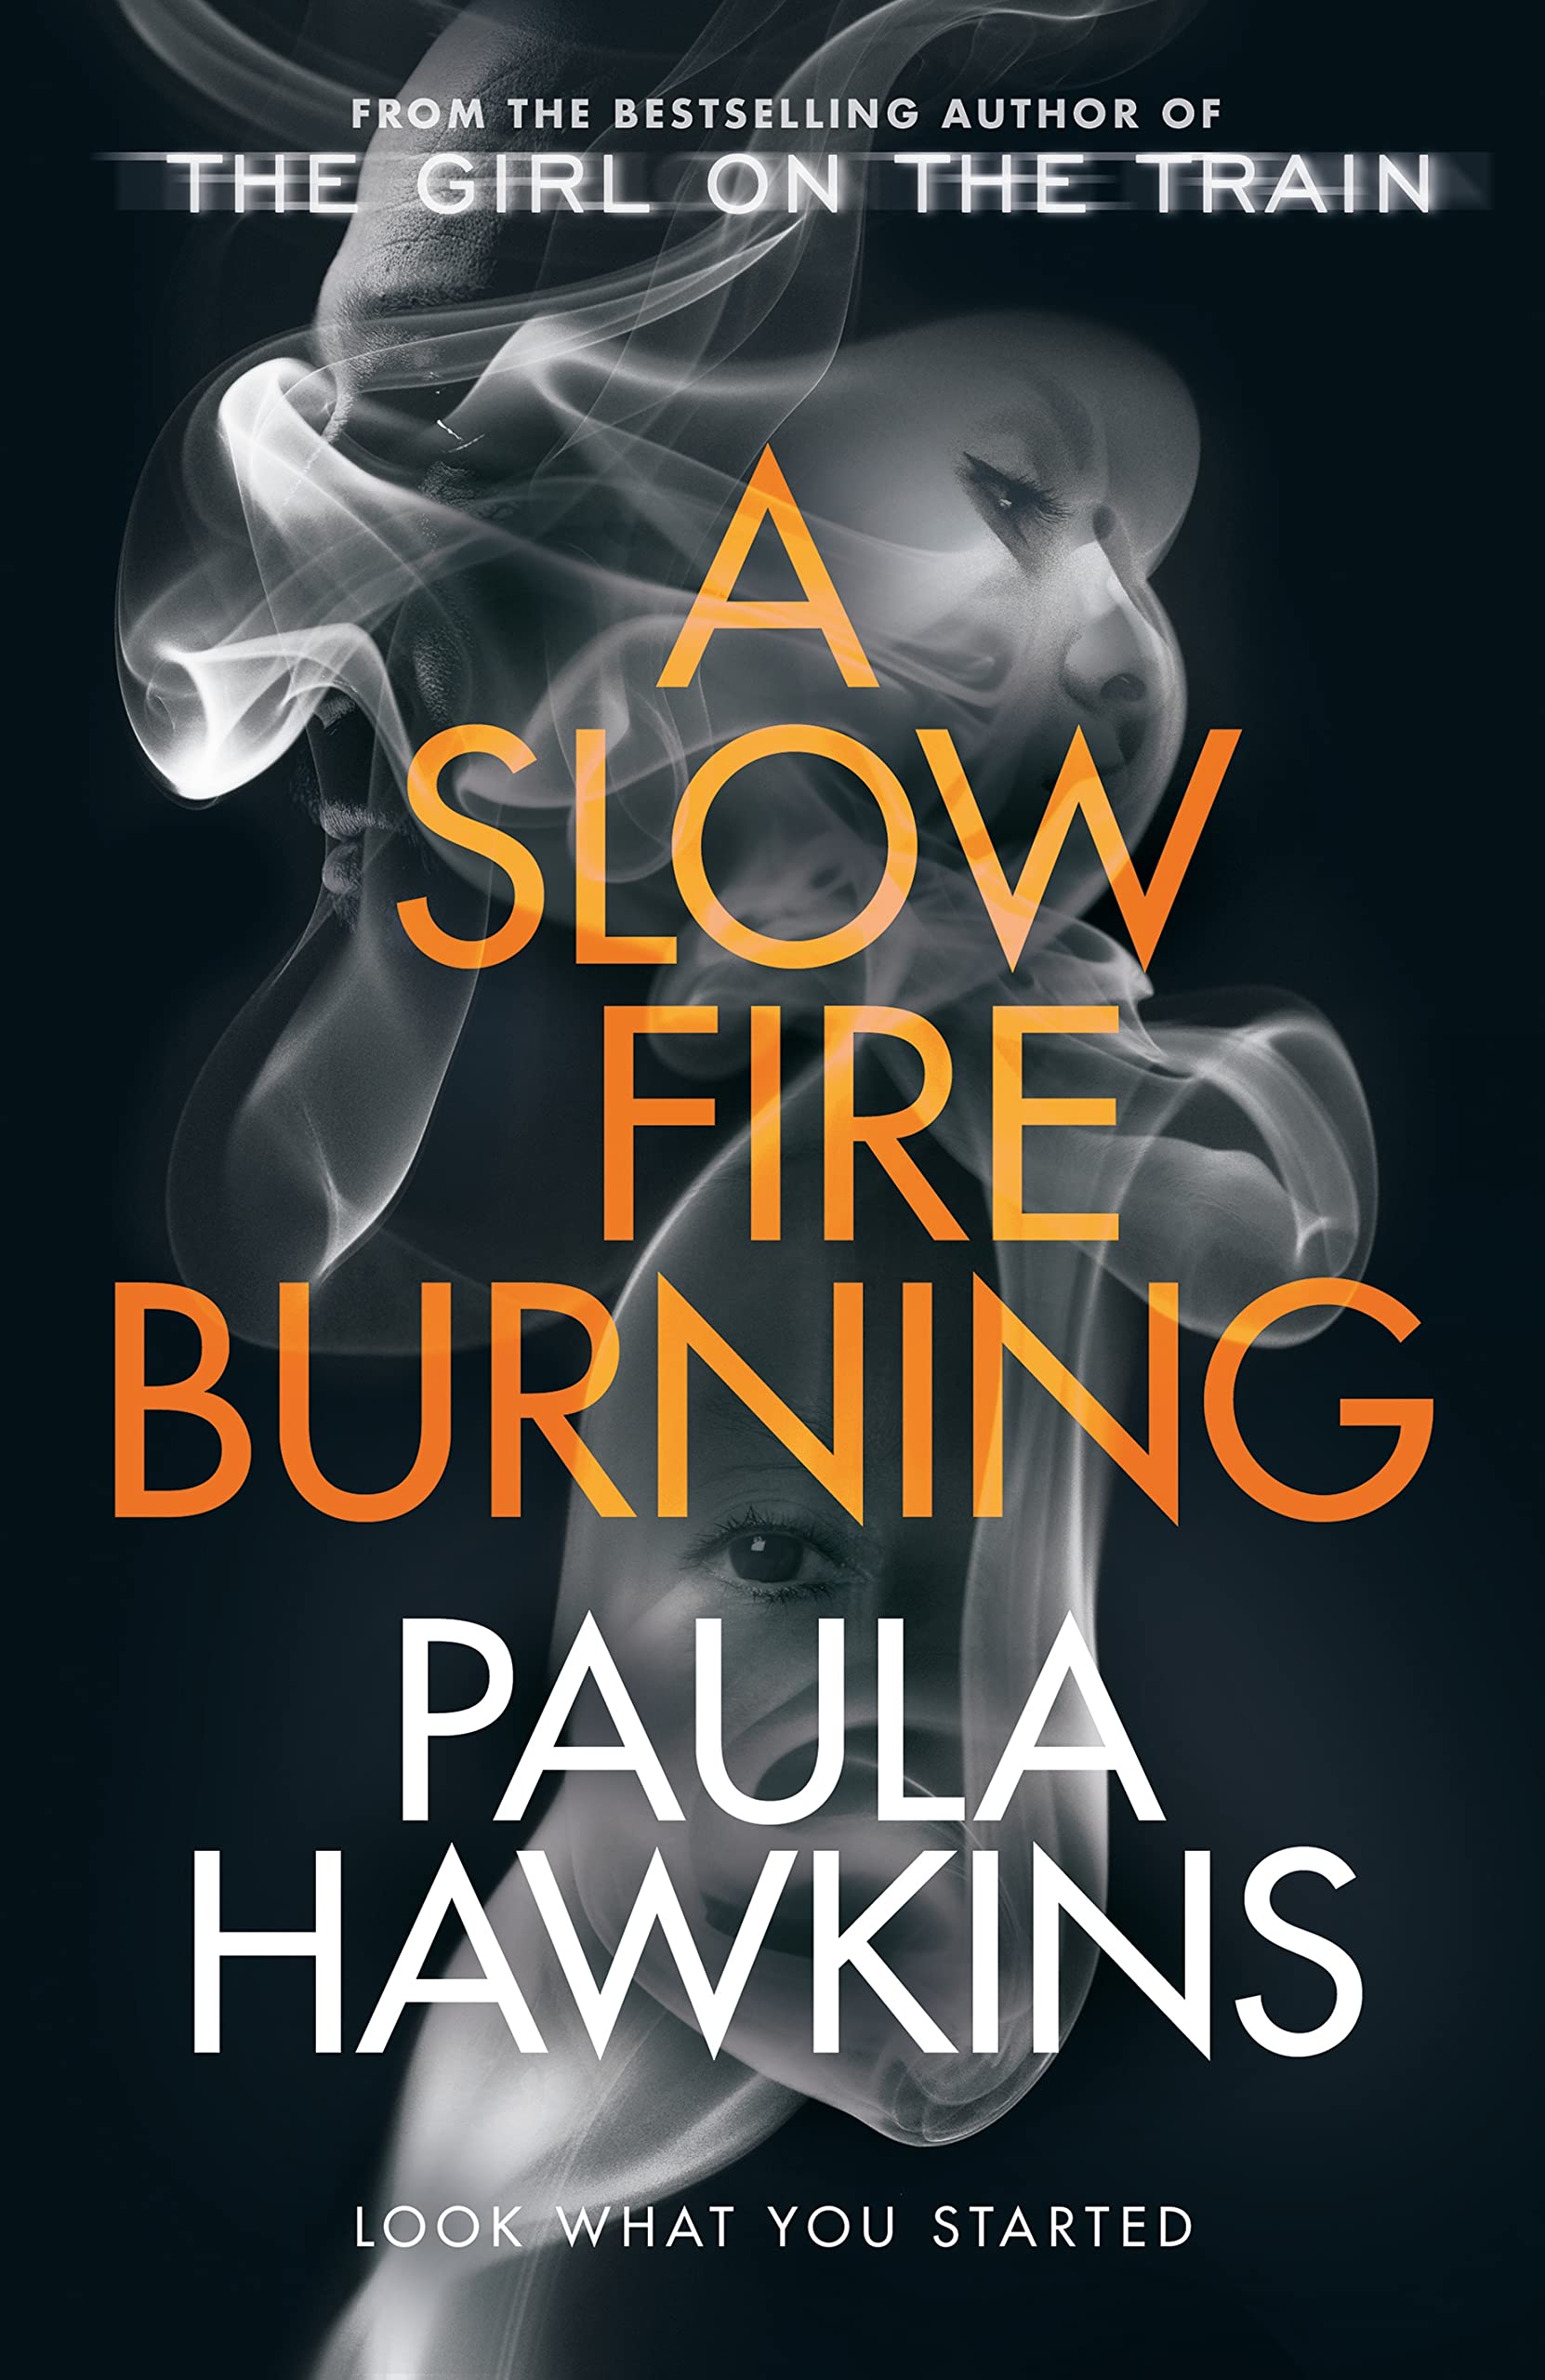 Must Read Books for Summer: A Slow Fire Burning